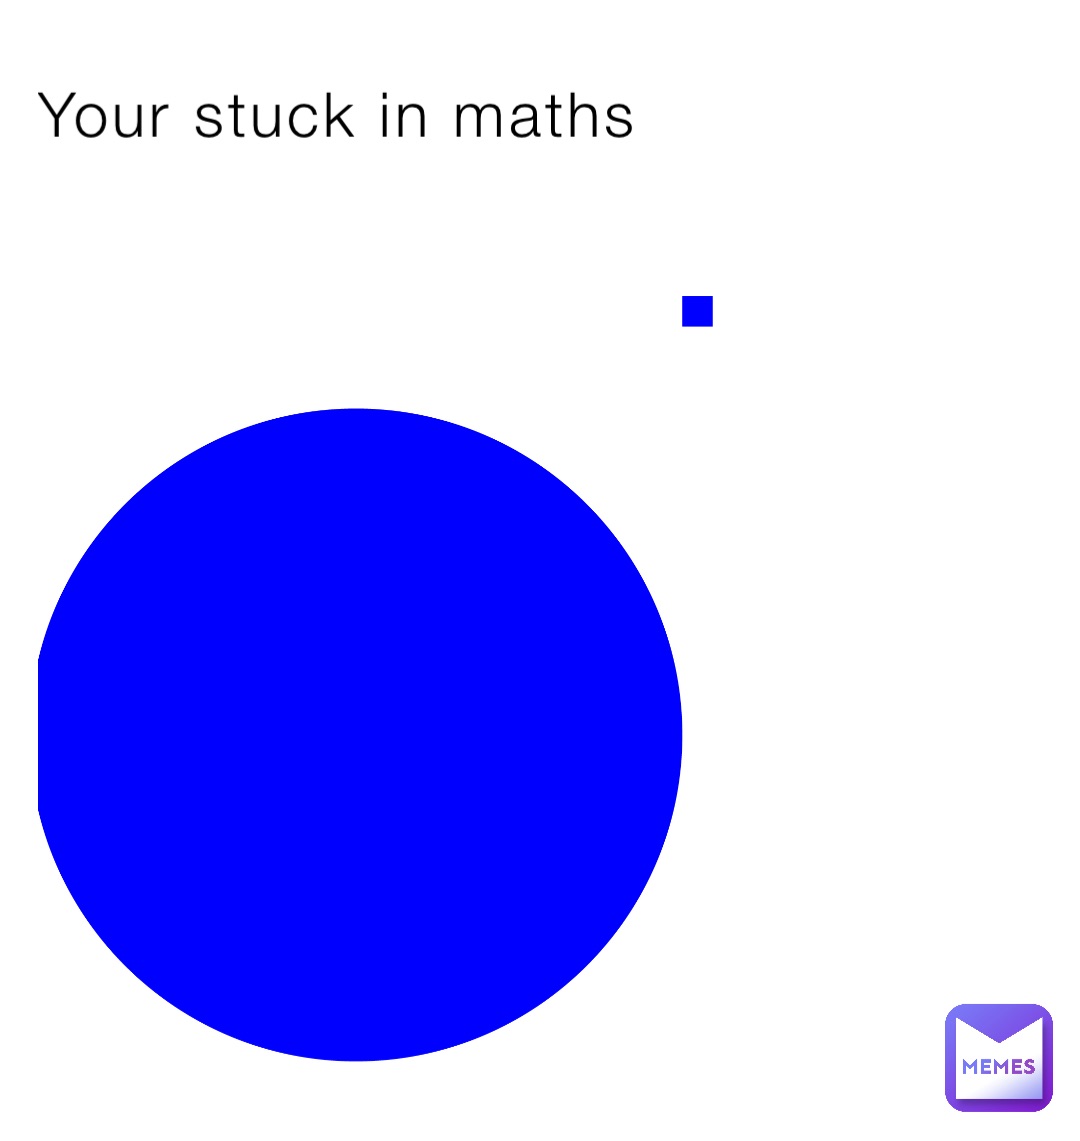 Your stuck in maths